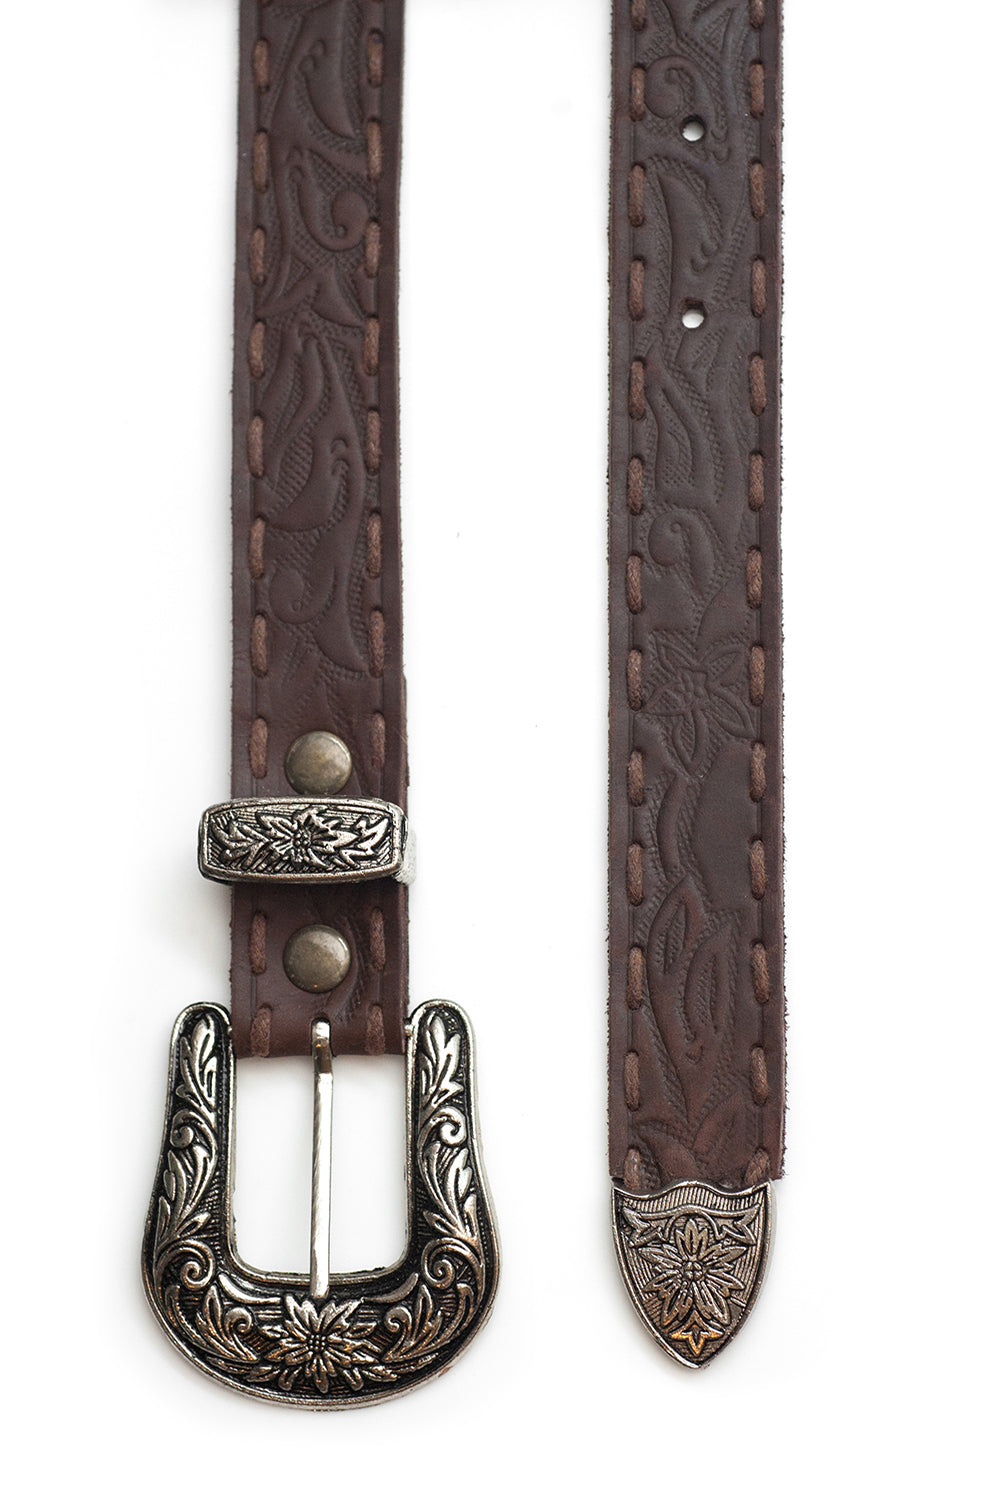 The Gypsy Queen Belt - Antique Brown - Tulle and Batiste